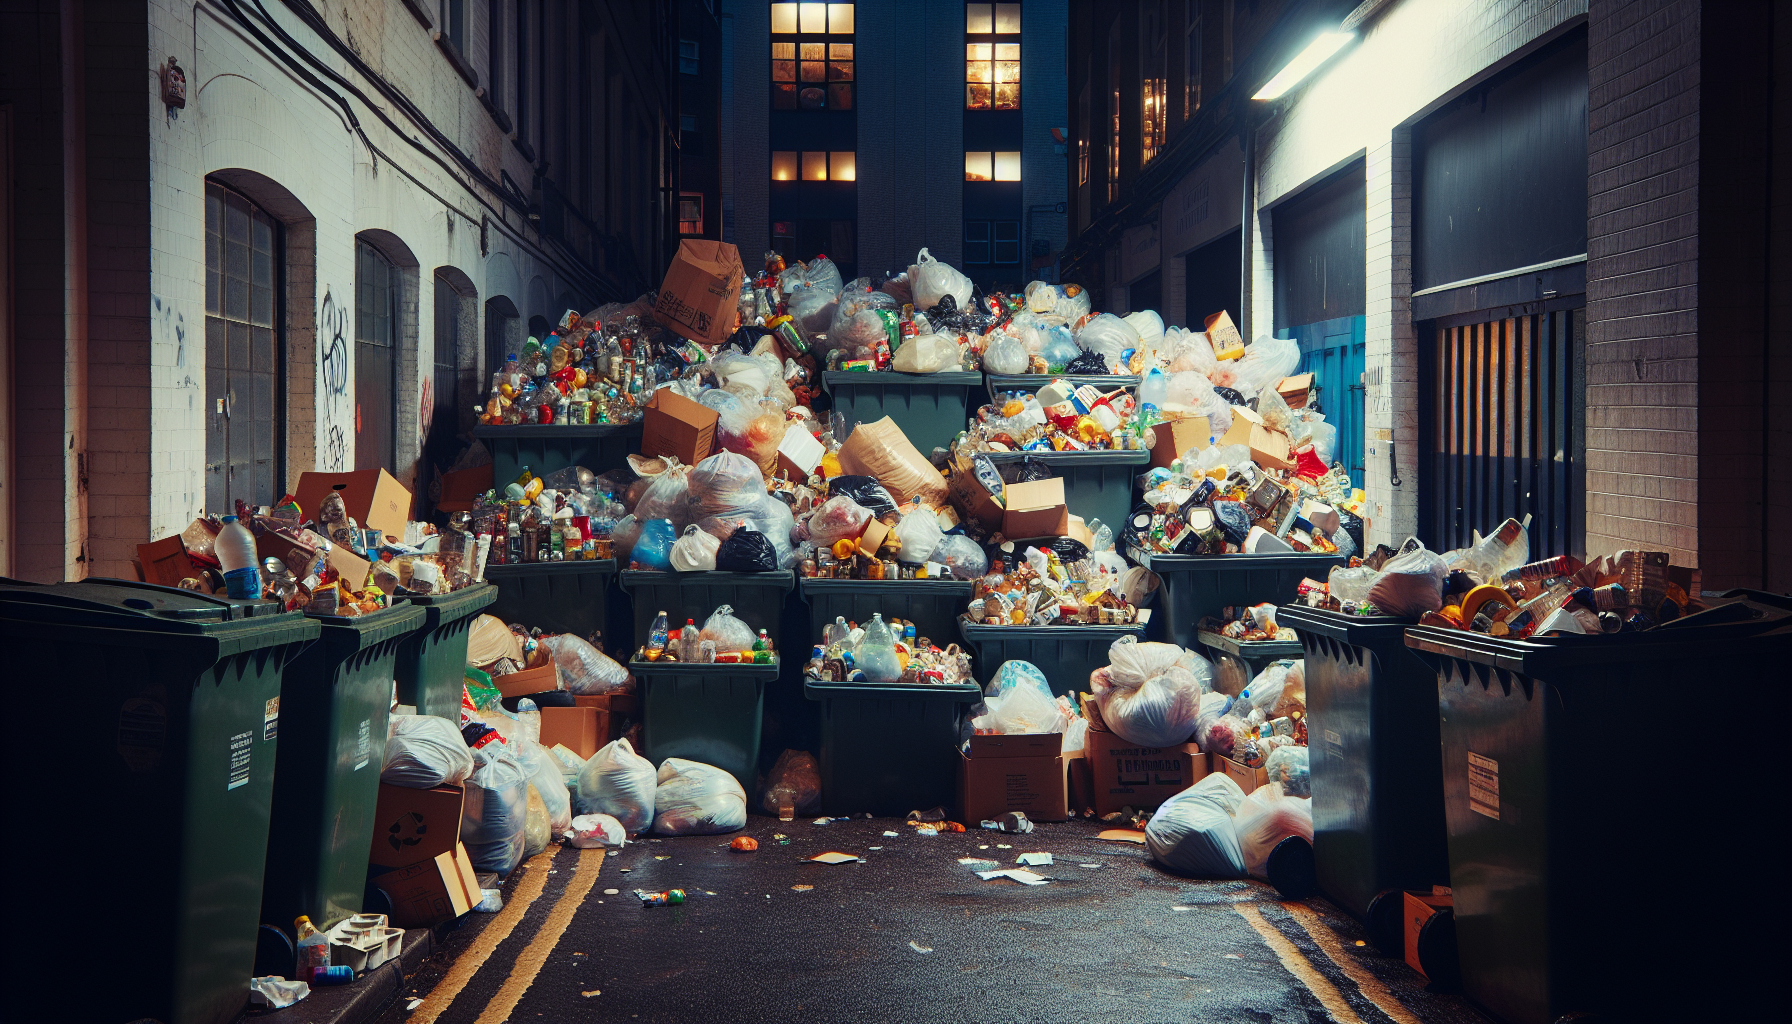 Bins filled with discarded food and recyclable items